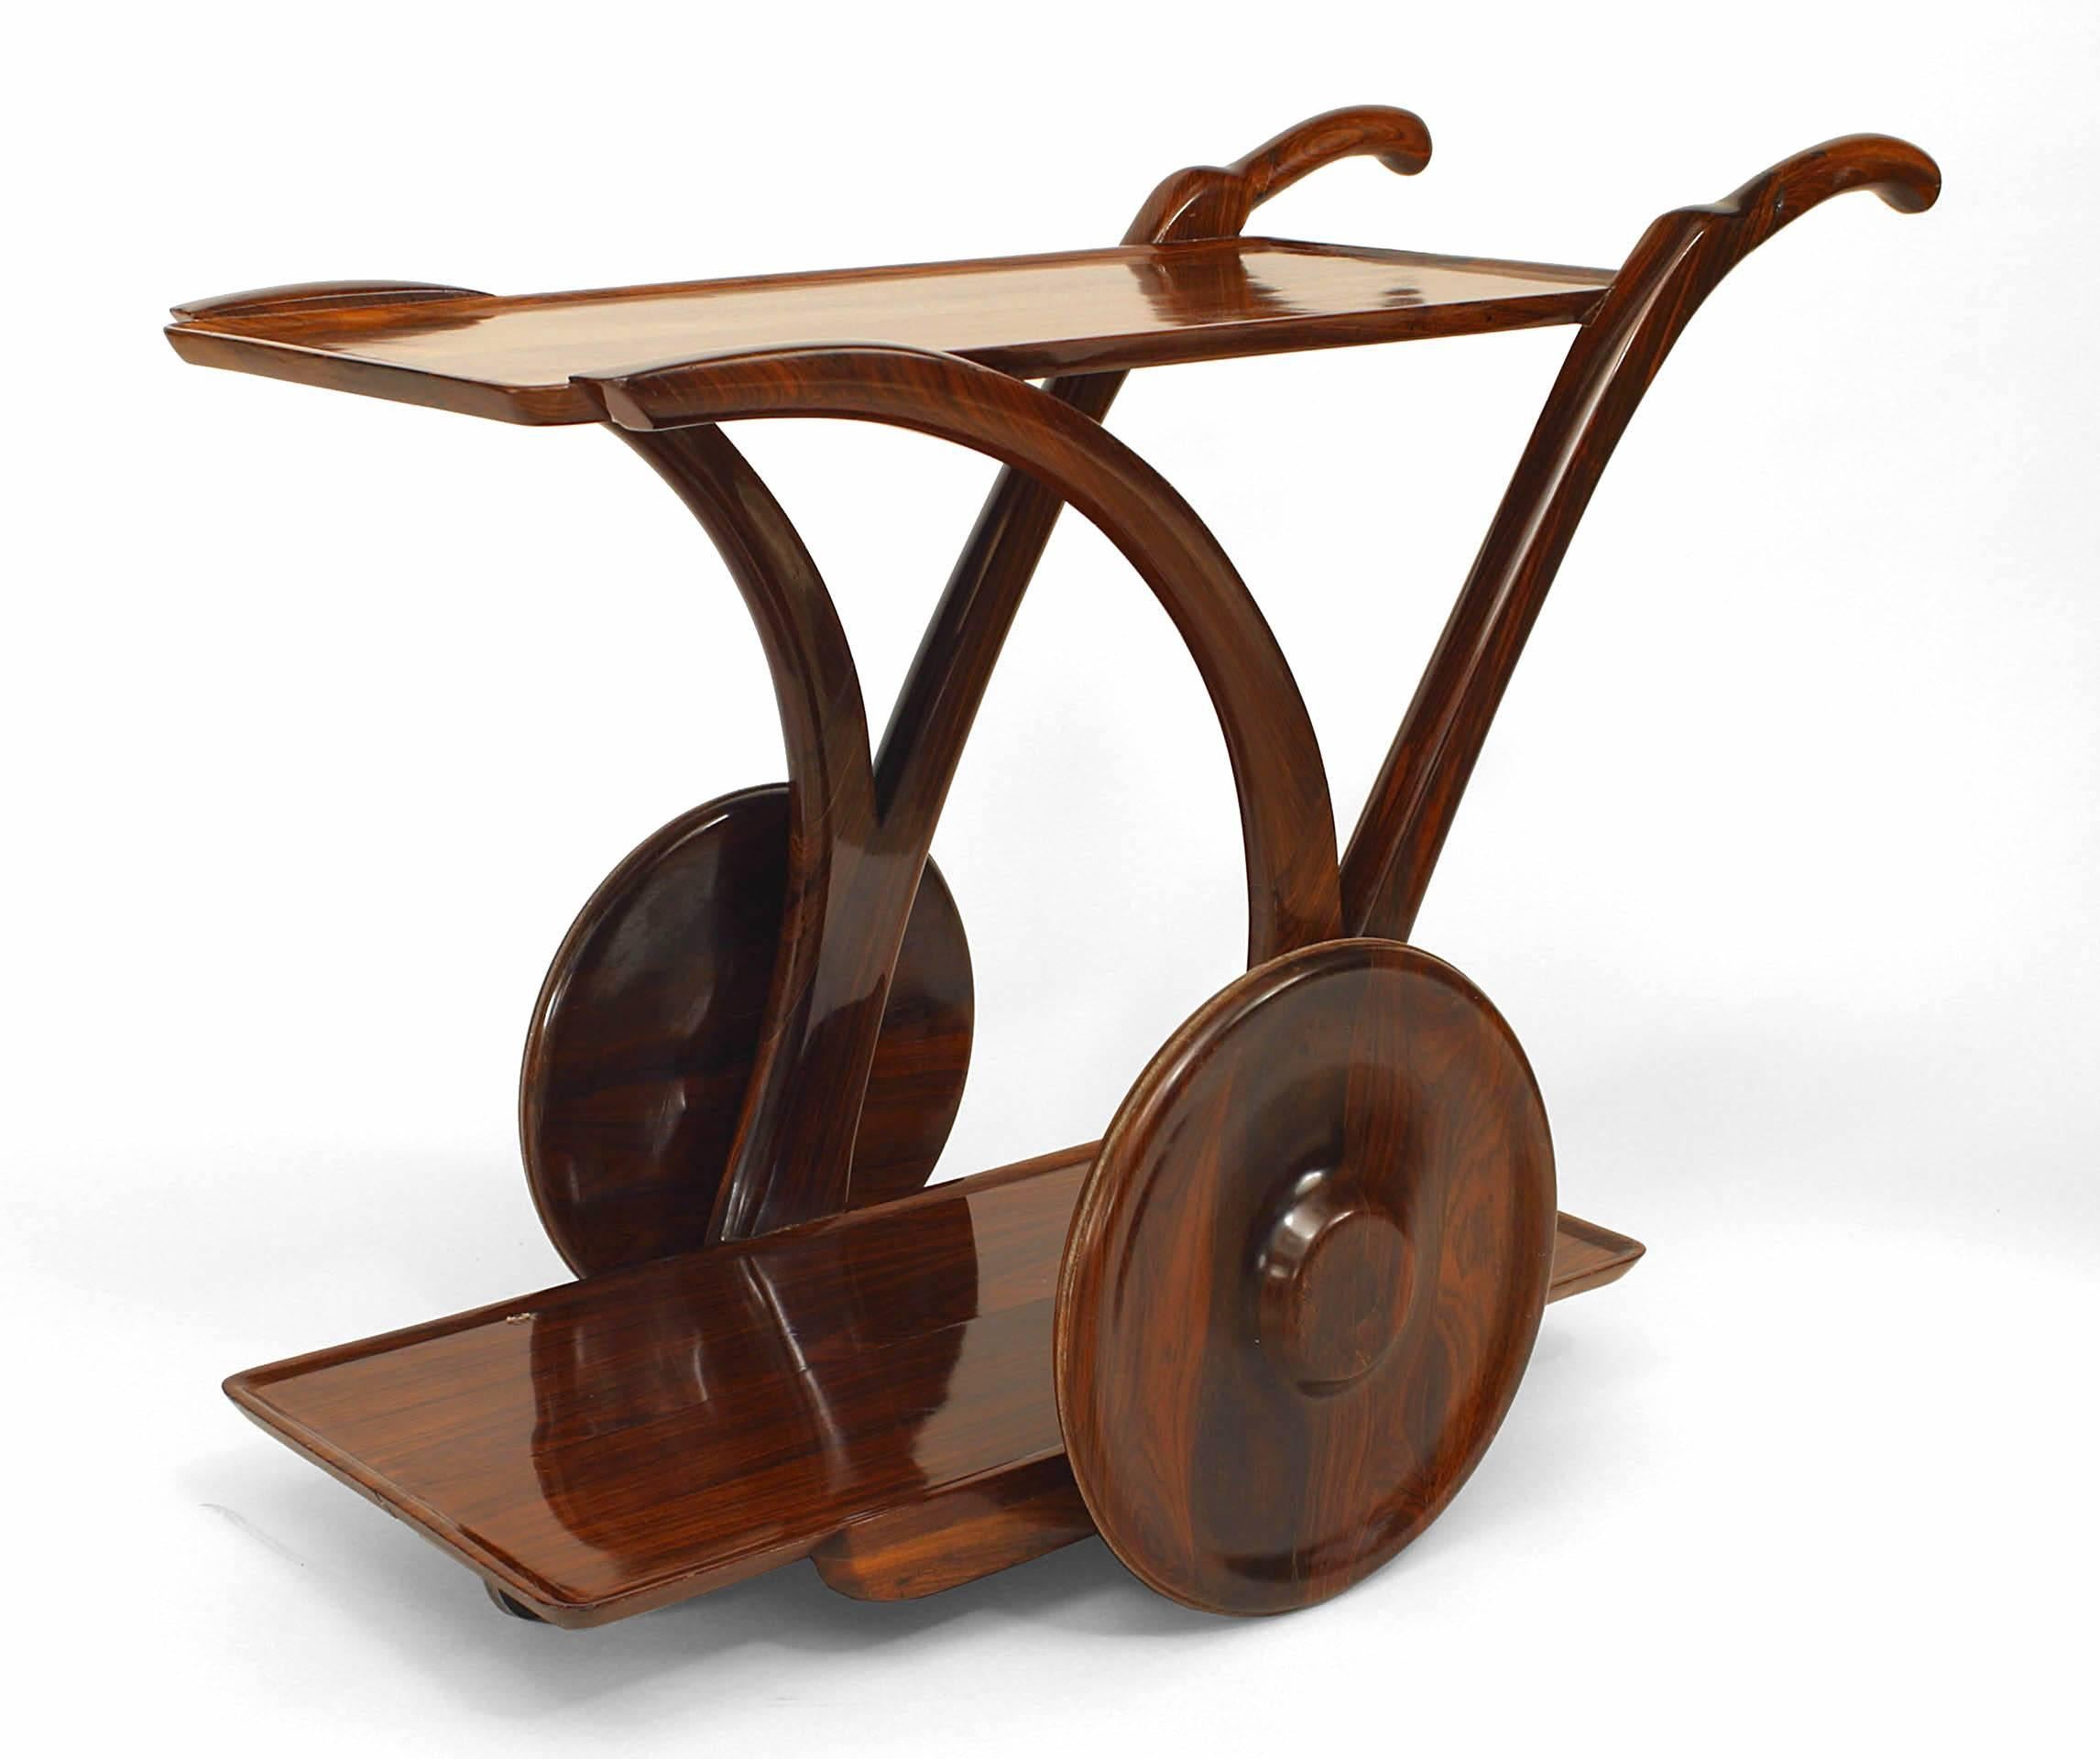 The unusual bar cart made of solid rose wood with shelf and 2 large centered wheels with front handles